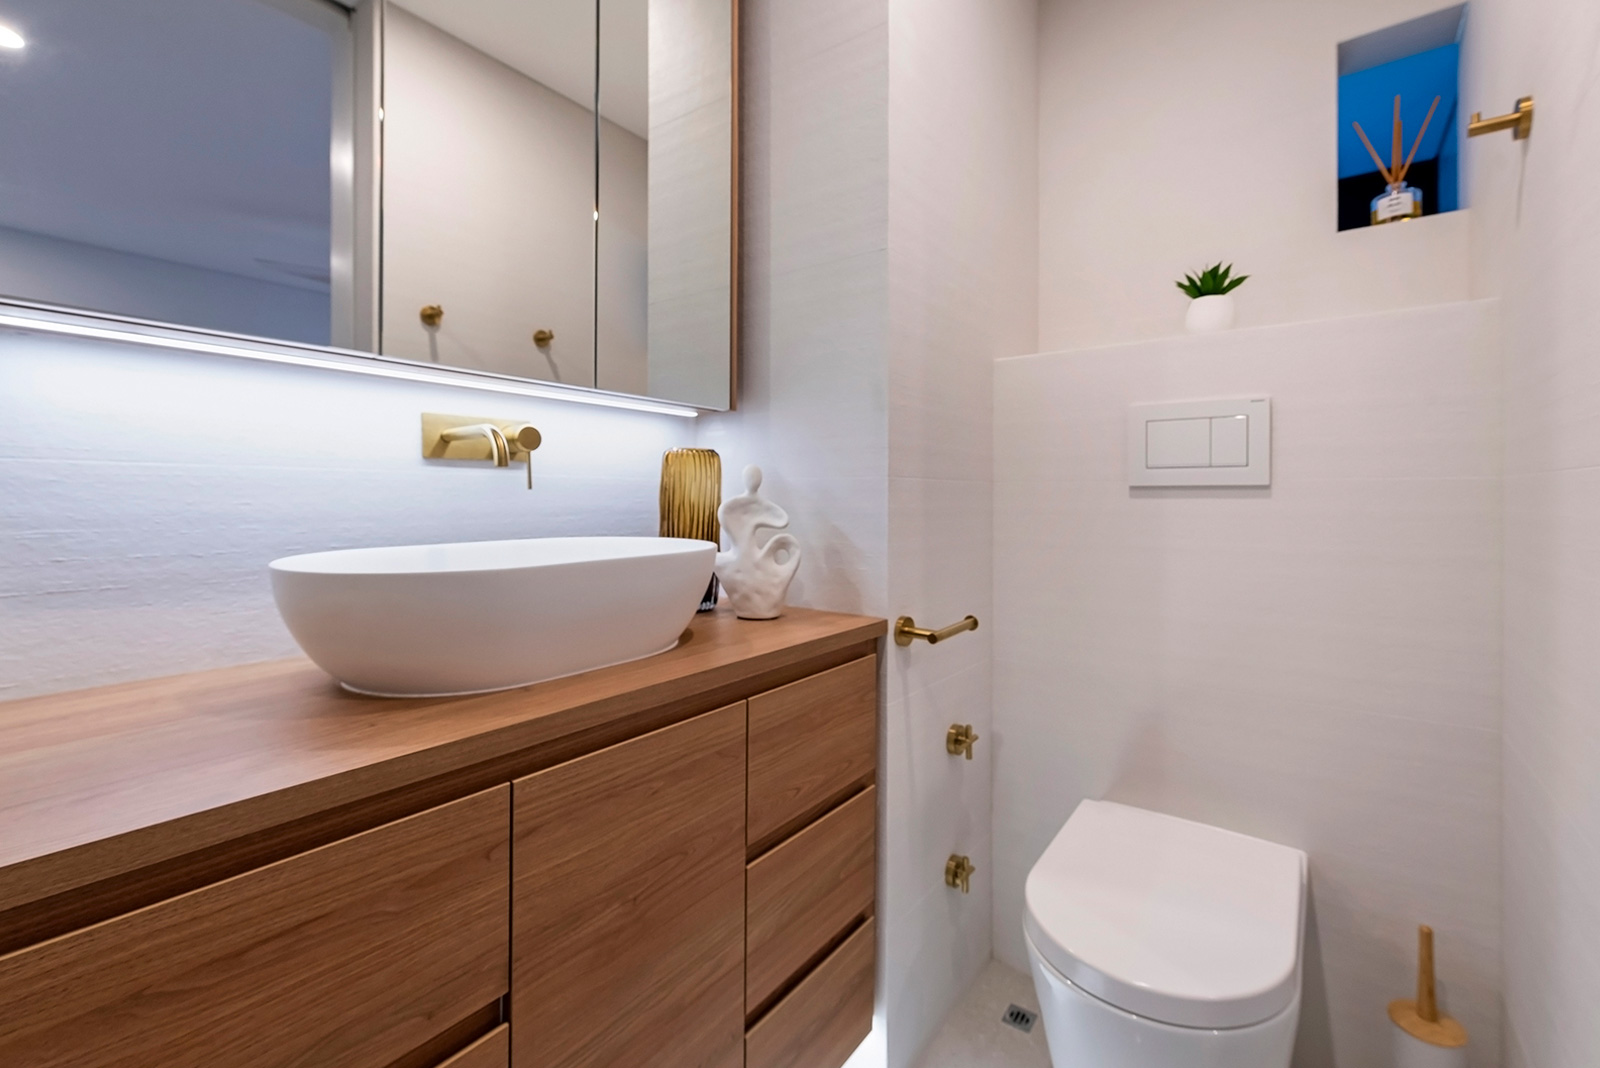 Bathroom in Crawley apartment with cabinetry designed by Studio Seventy Four